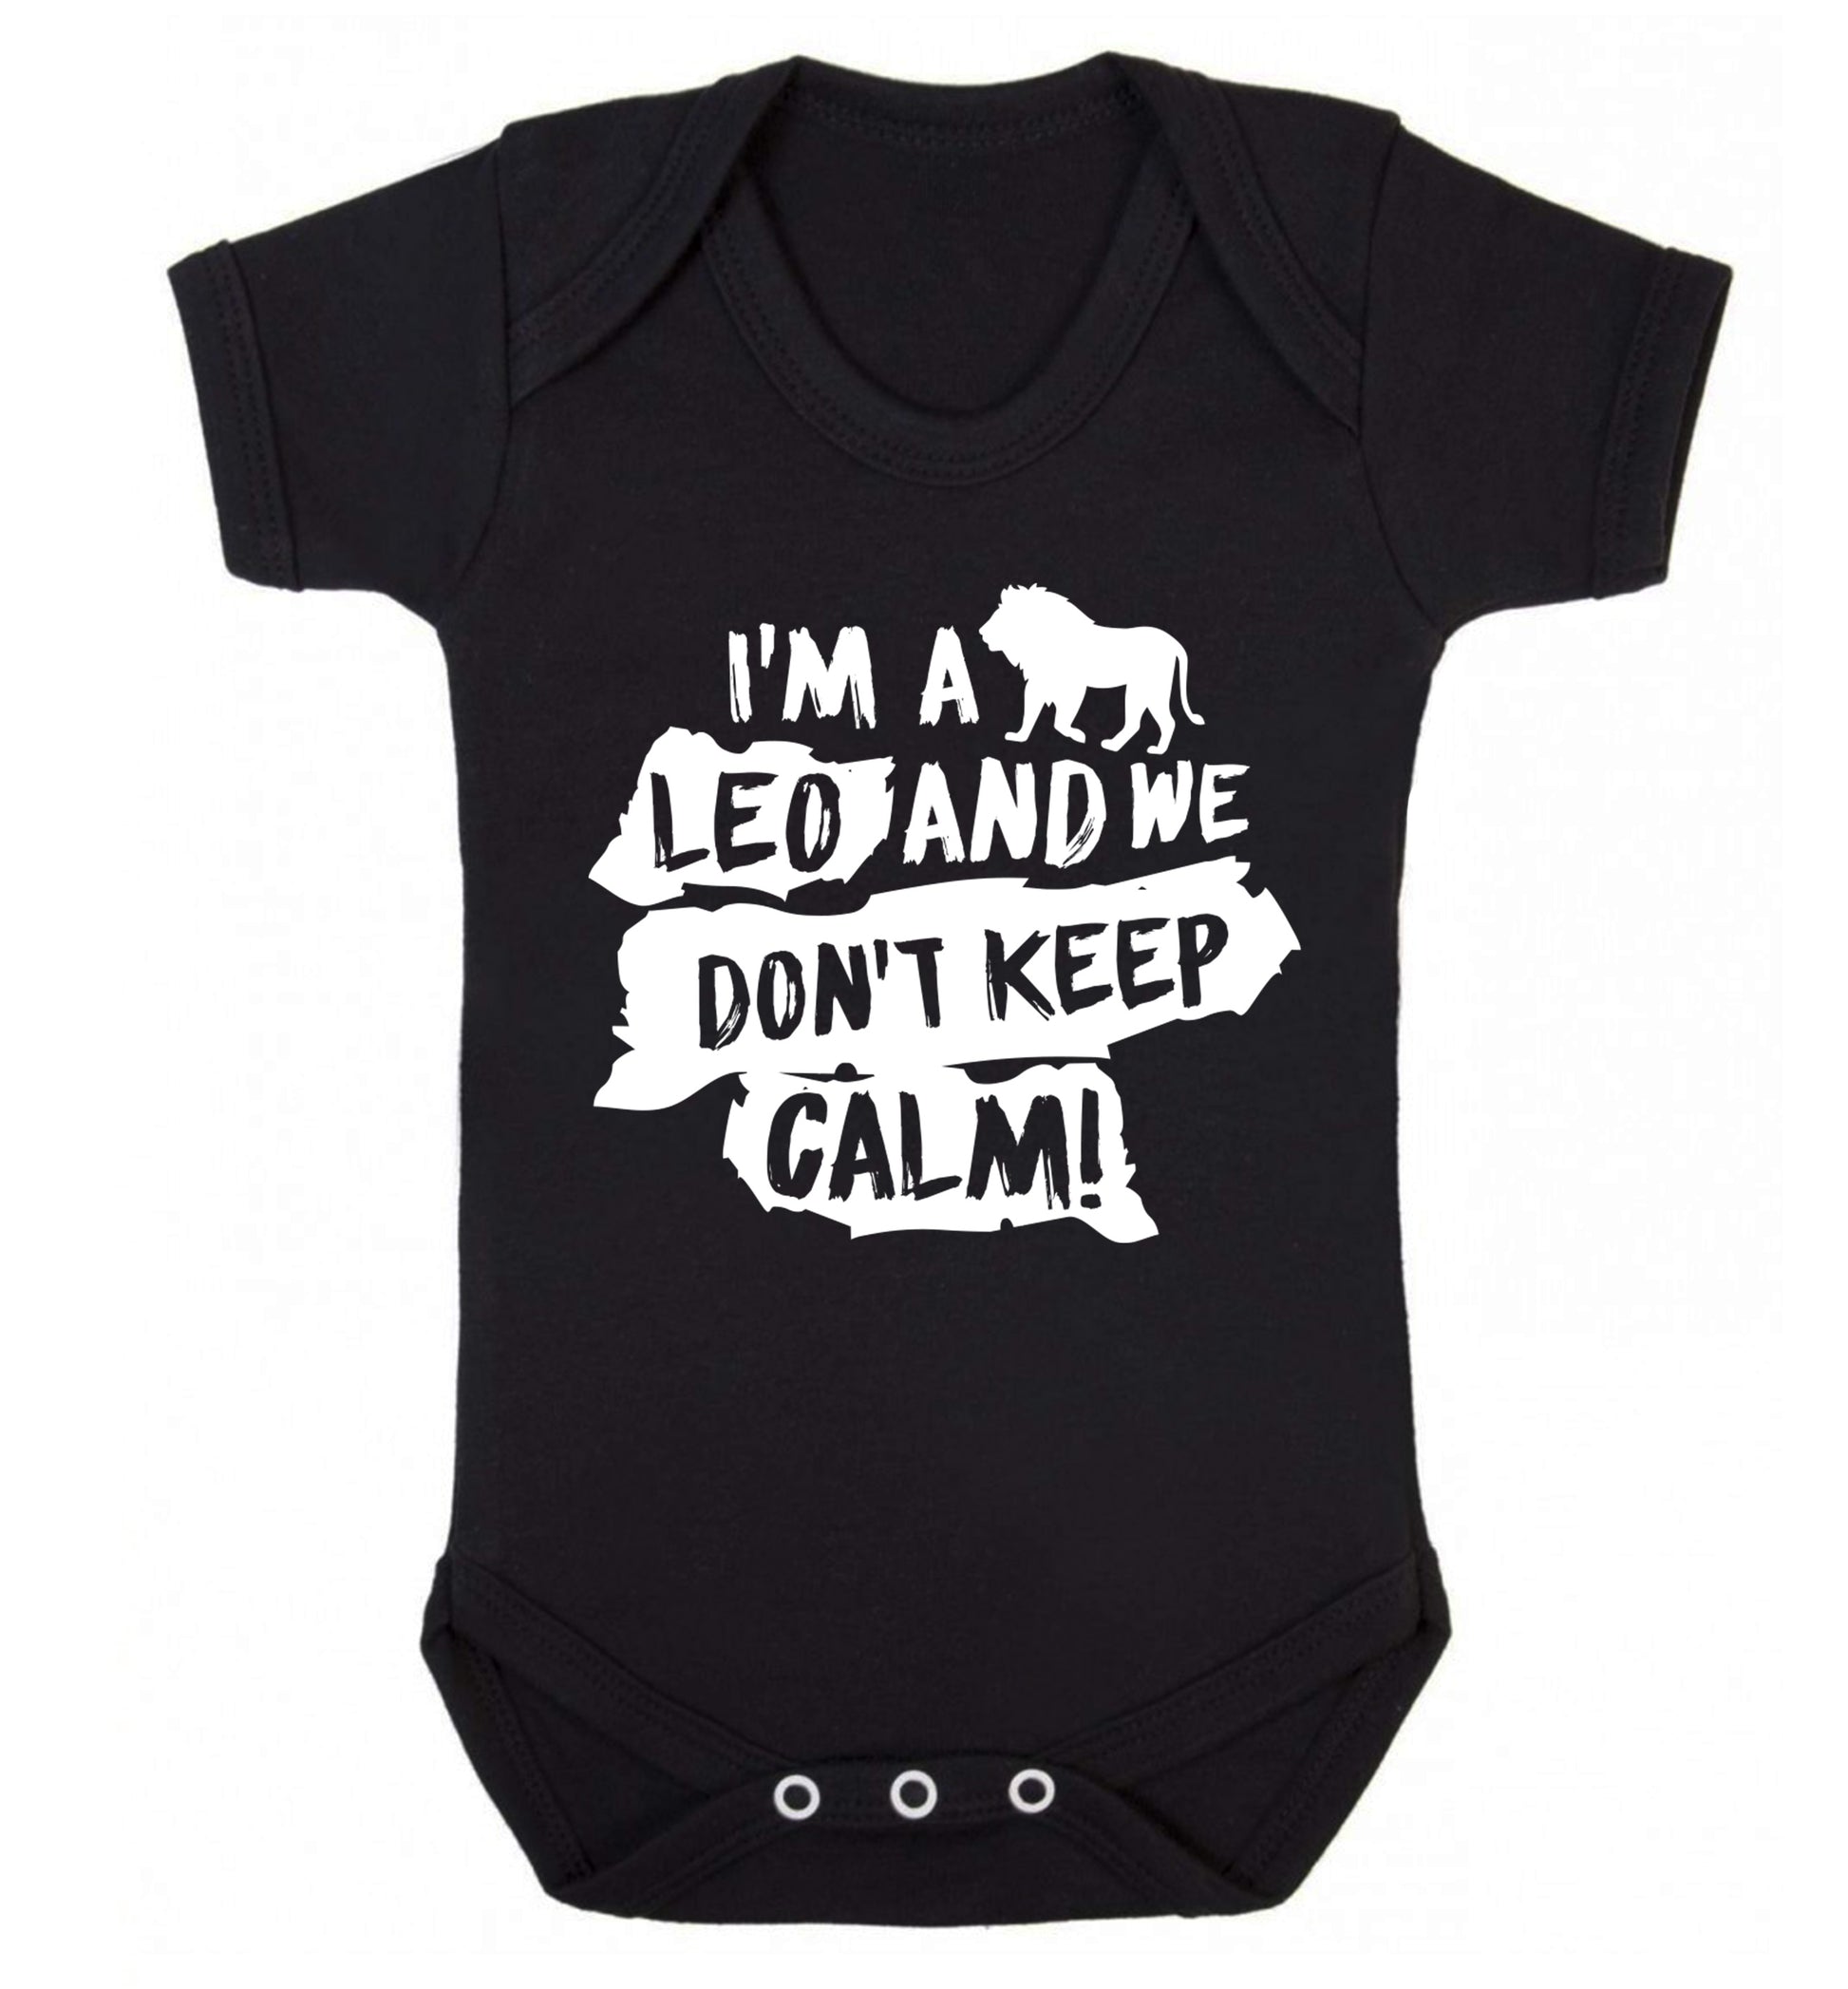 I'm a leo and we don't keep calm! Baby Vest black 18-24 months